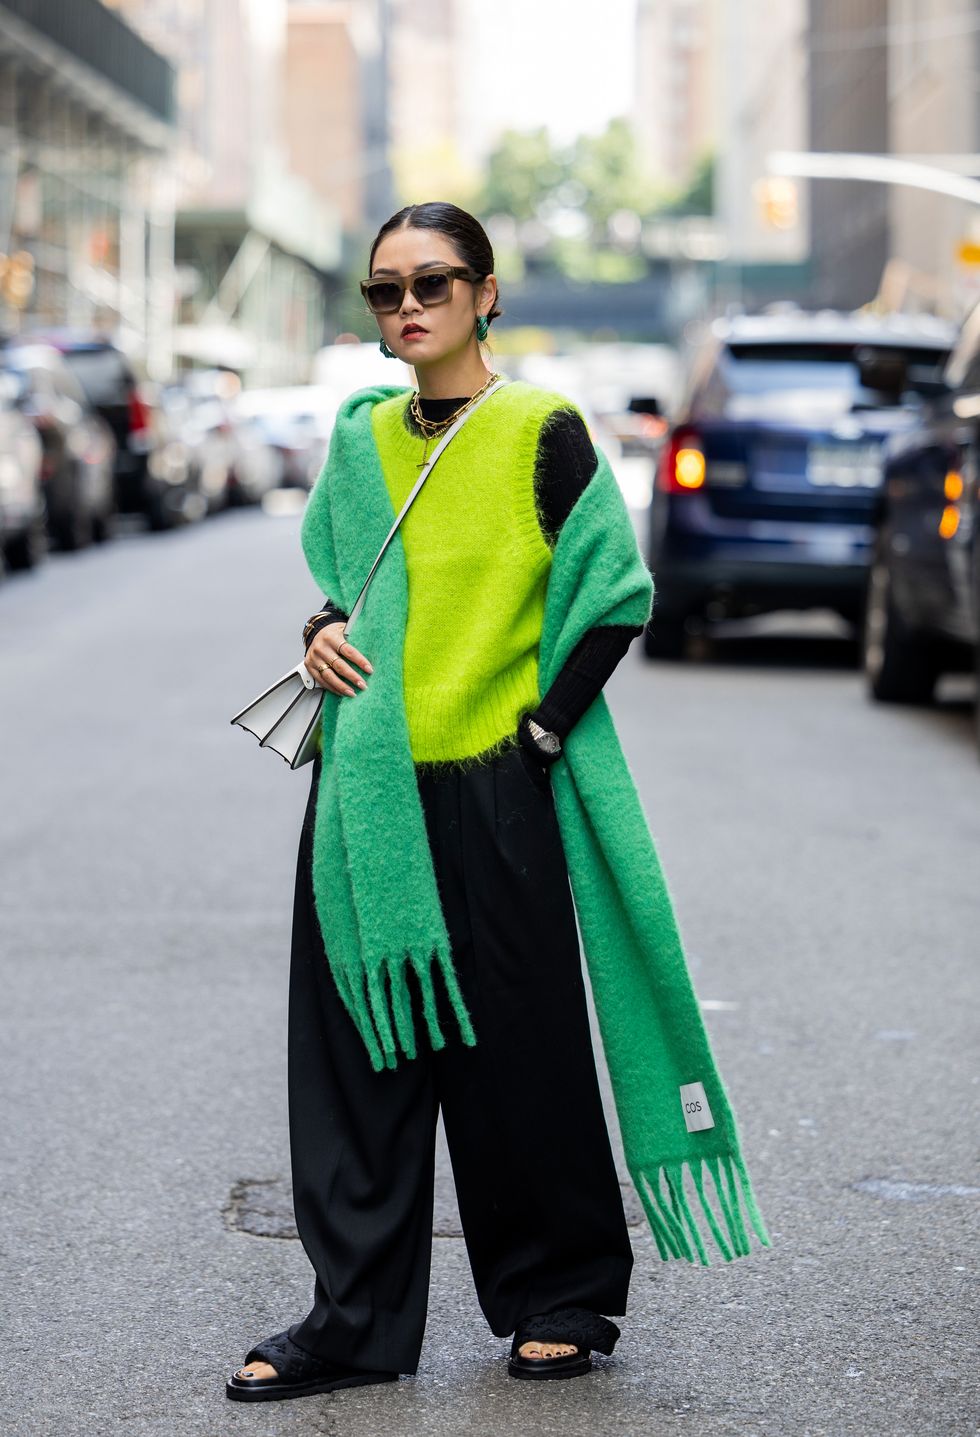 a person in a green dress walking down the street